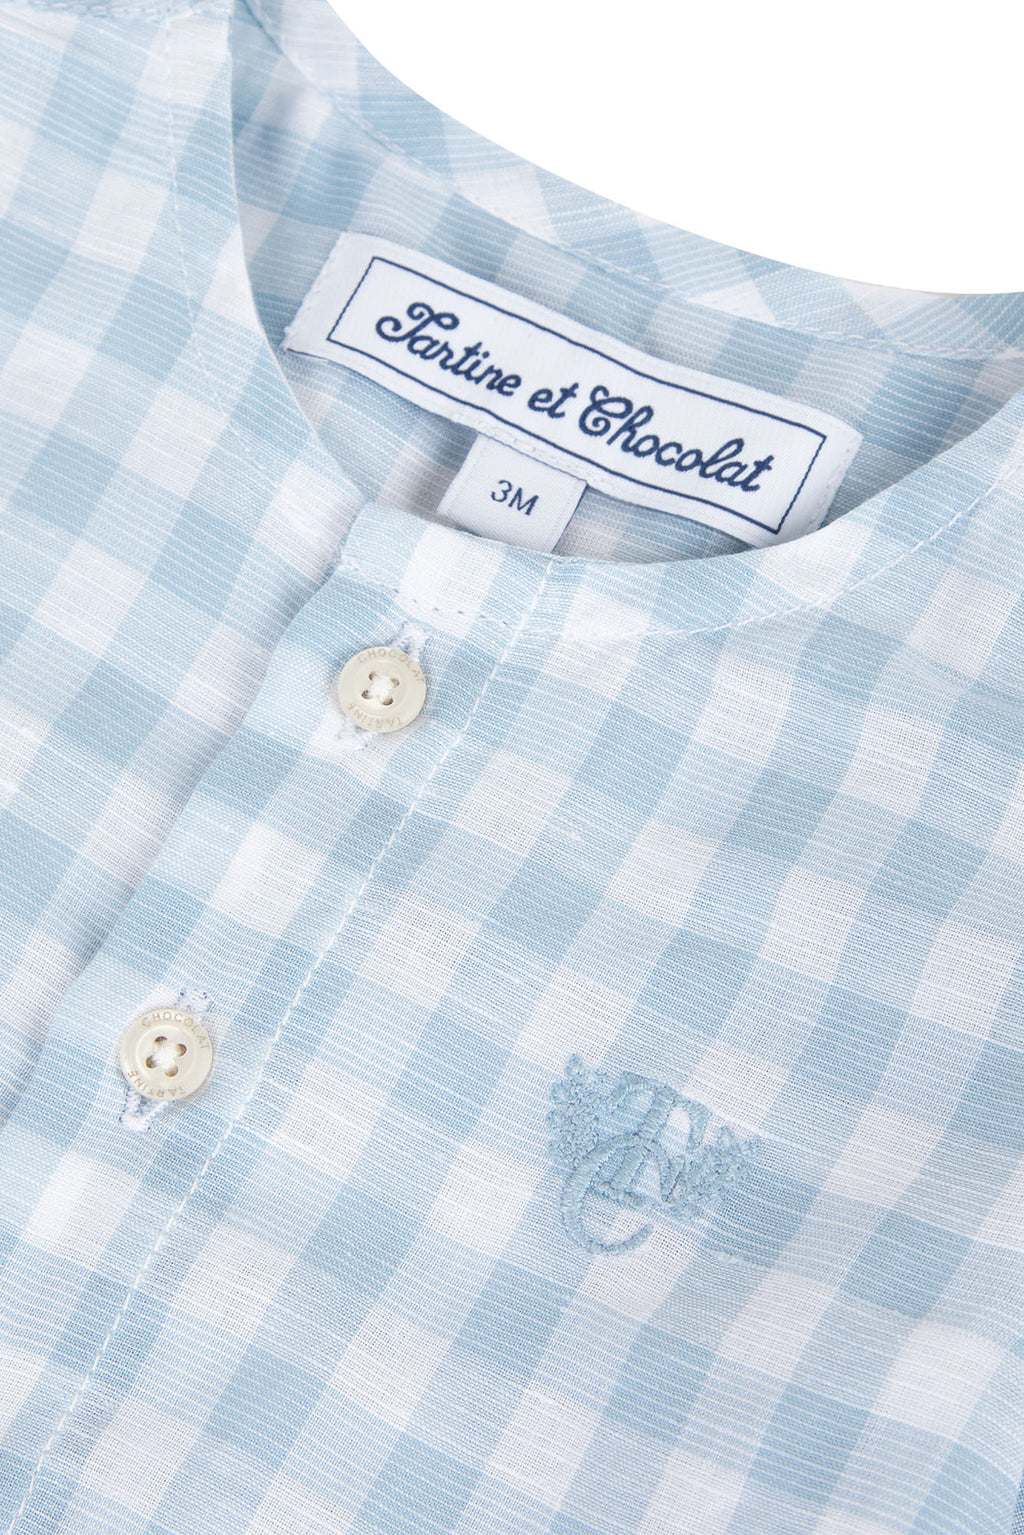 Shirt - Cotton Two-tone gingham long sleeves